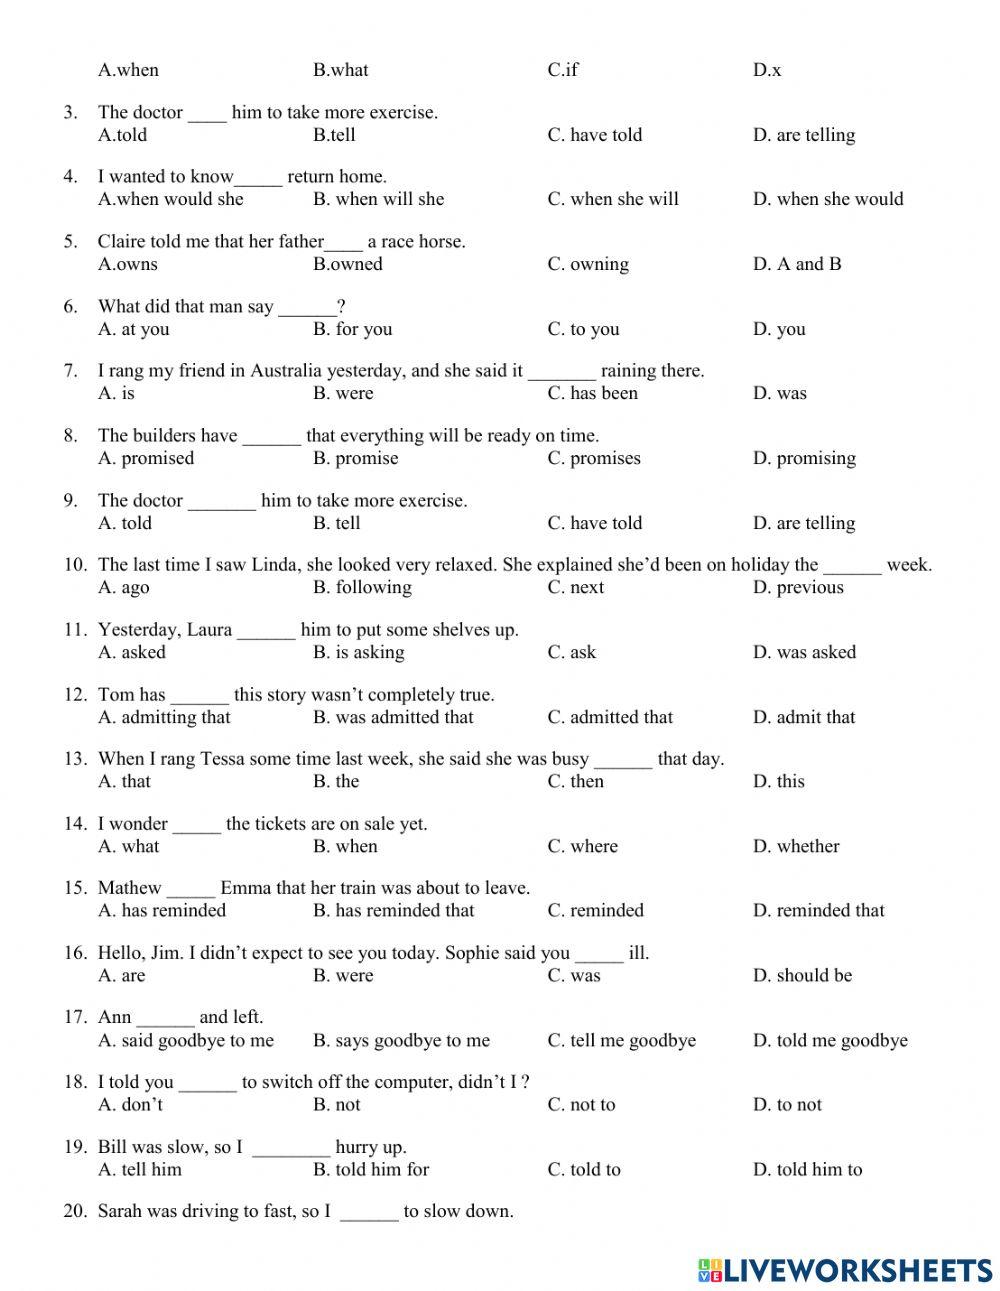 Reported Speech online exercise for 9 | Live Worksheets